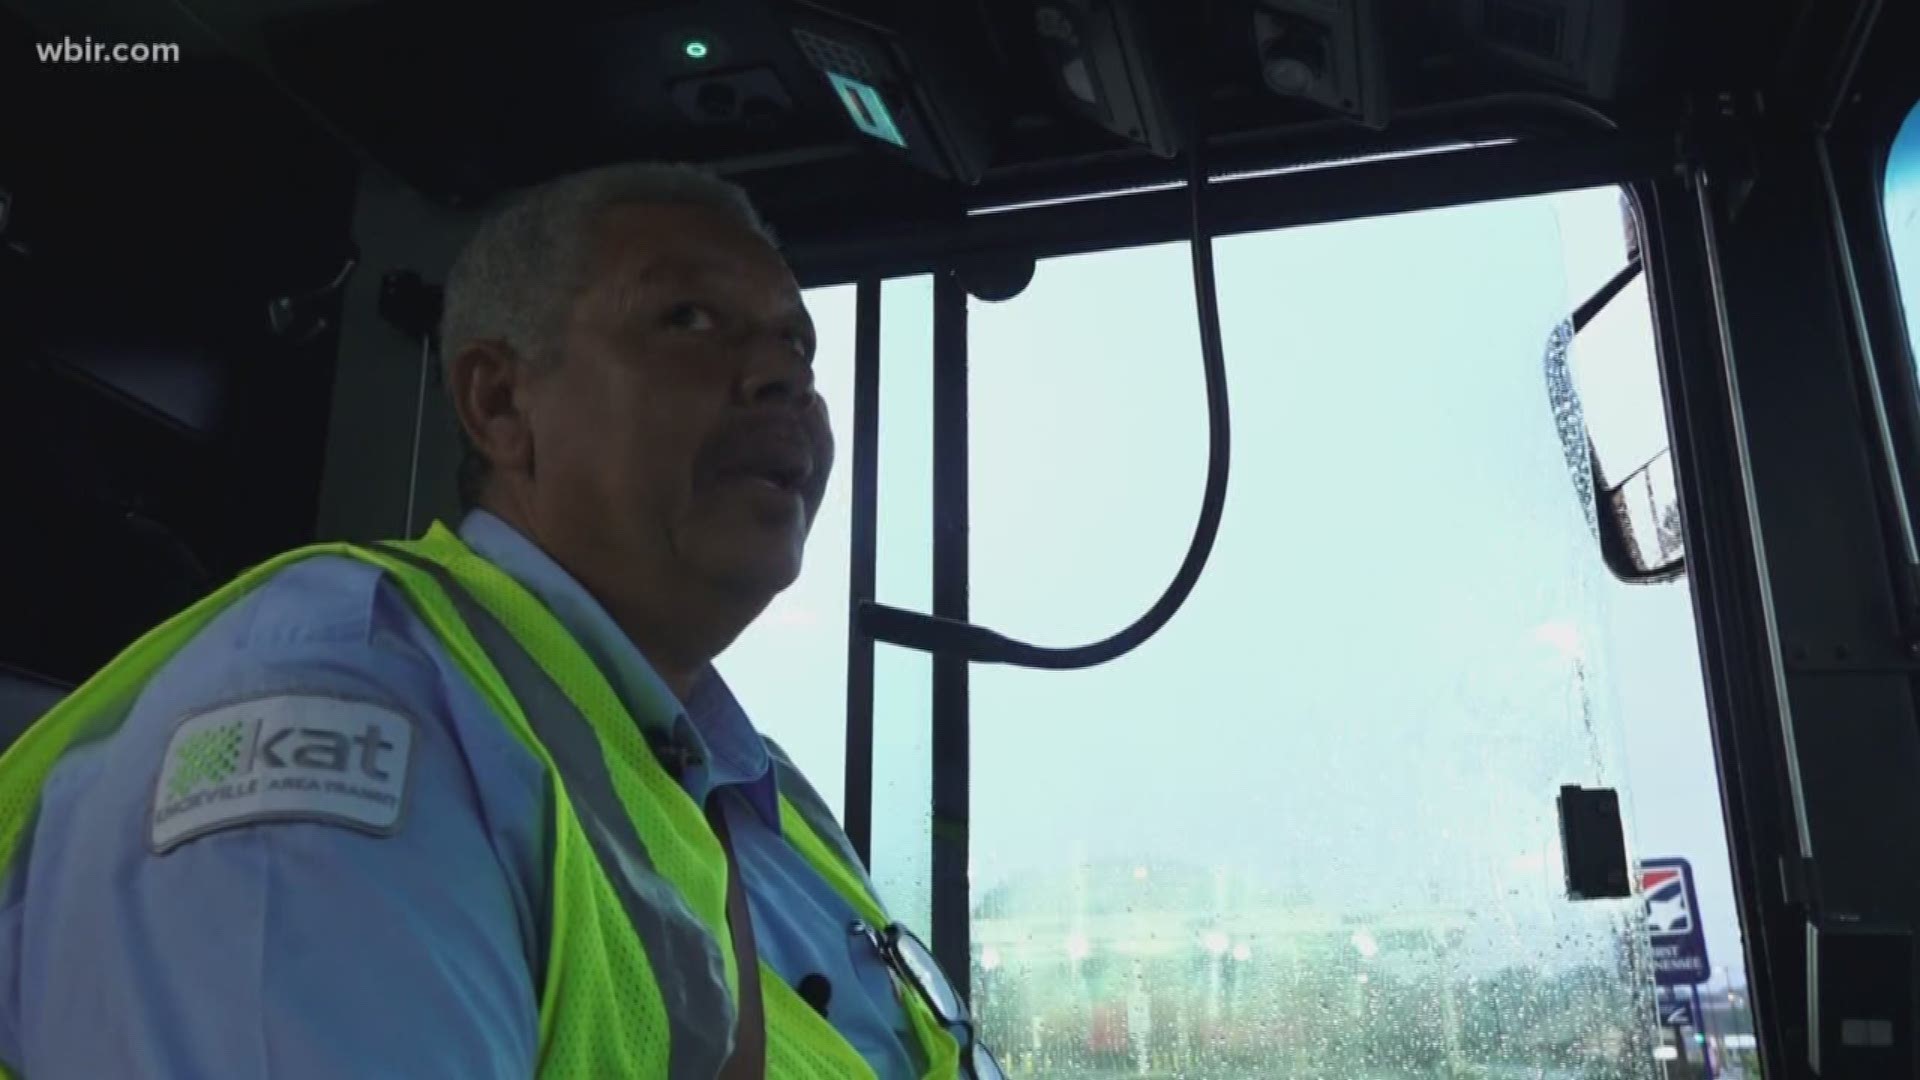 Frank drives a bus every day for the city of Knoxville. He shares his positive energy with every passengers who steps aboard!